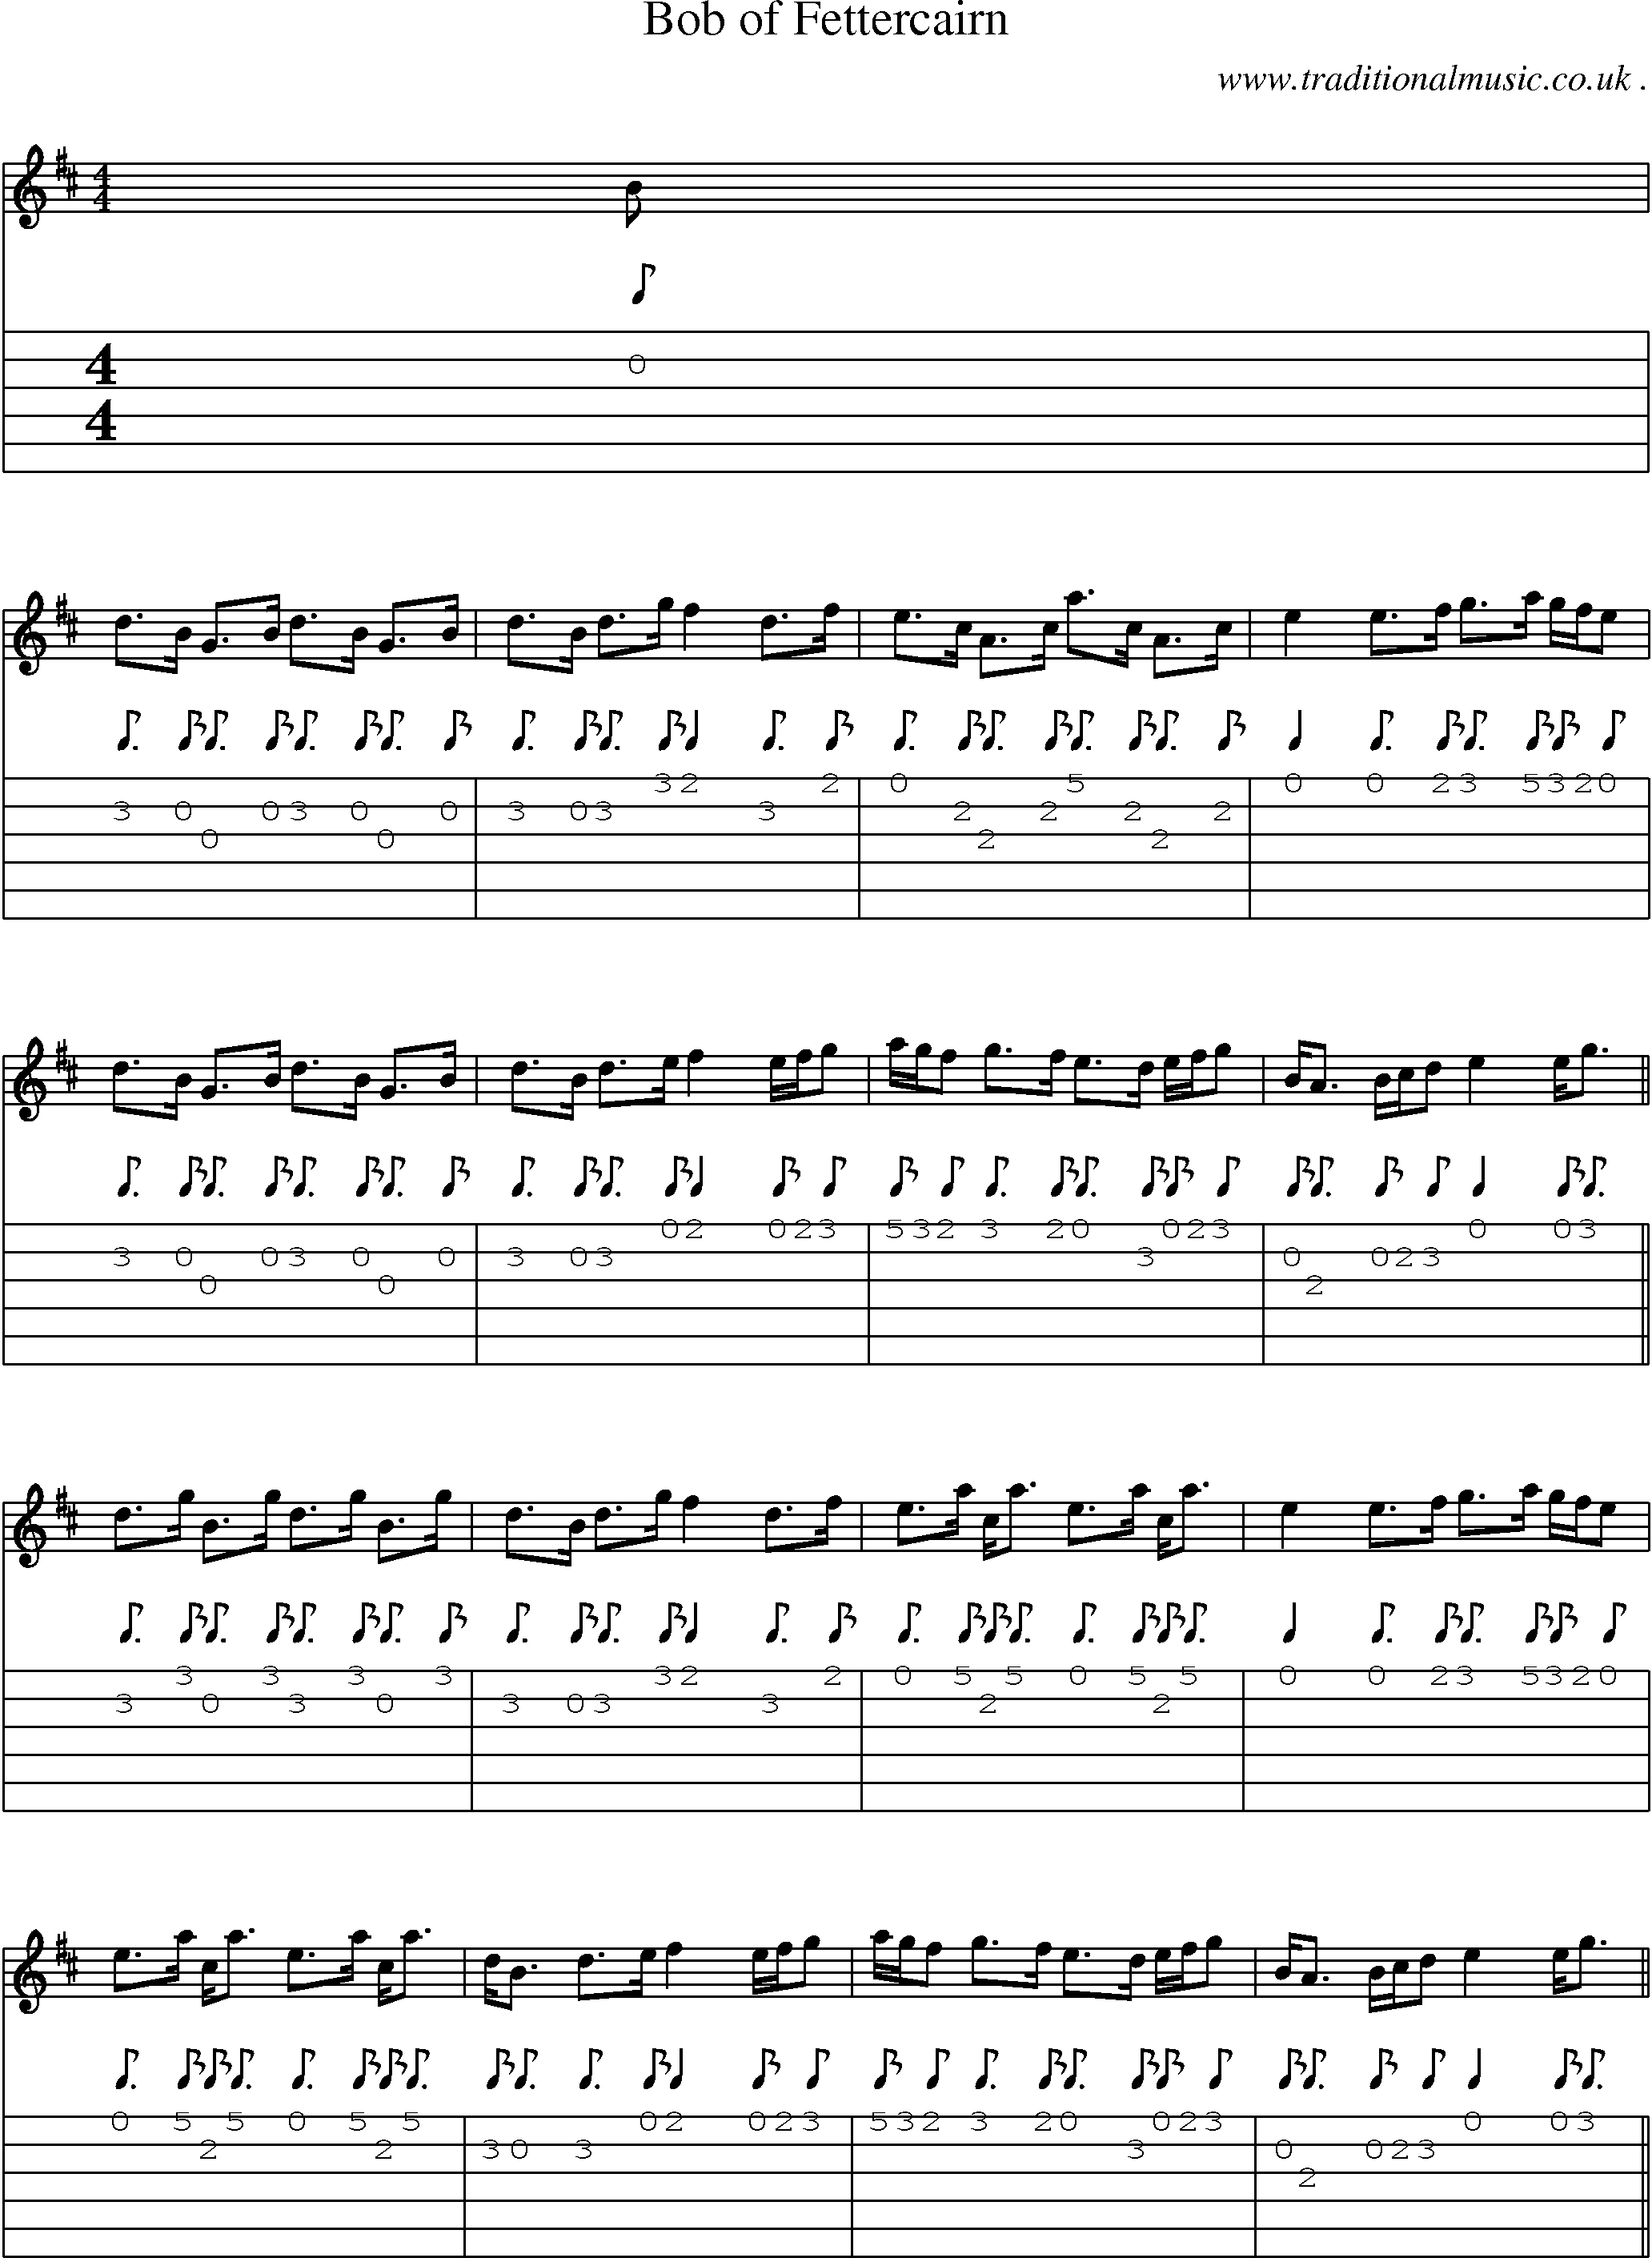 Sheet-music  score, Chords and Guitar Tabs for Bob Of Fettercairn